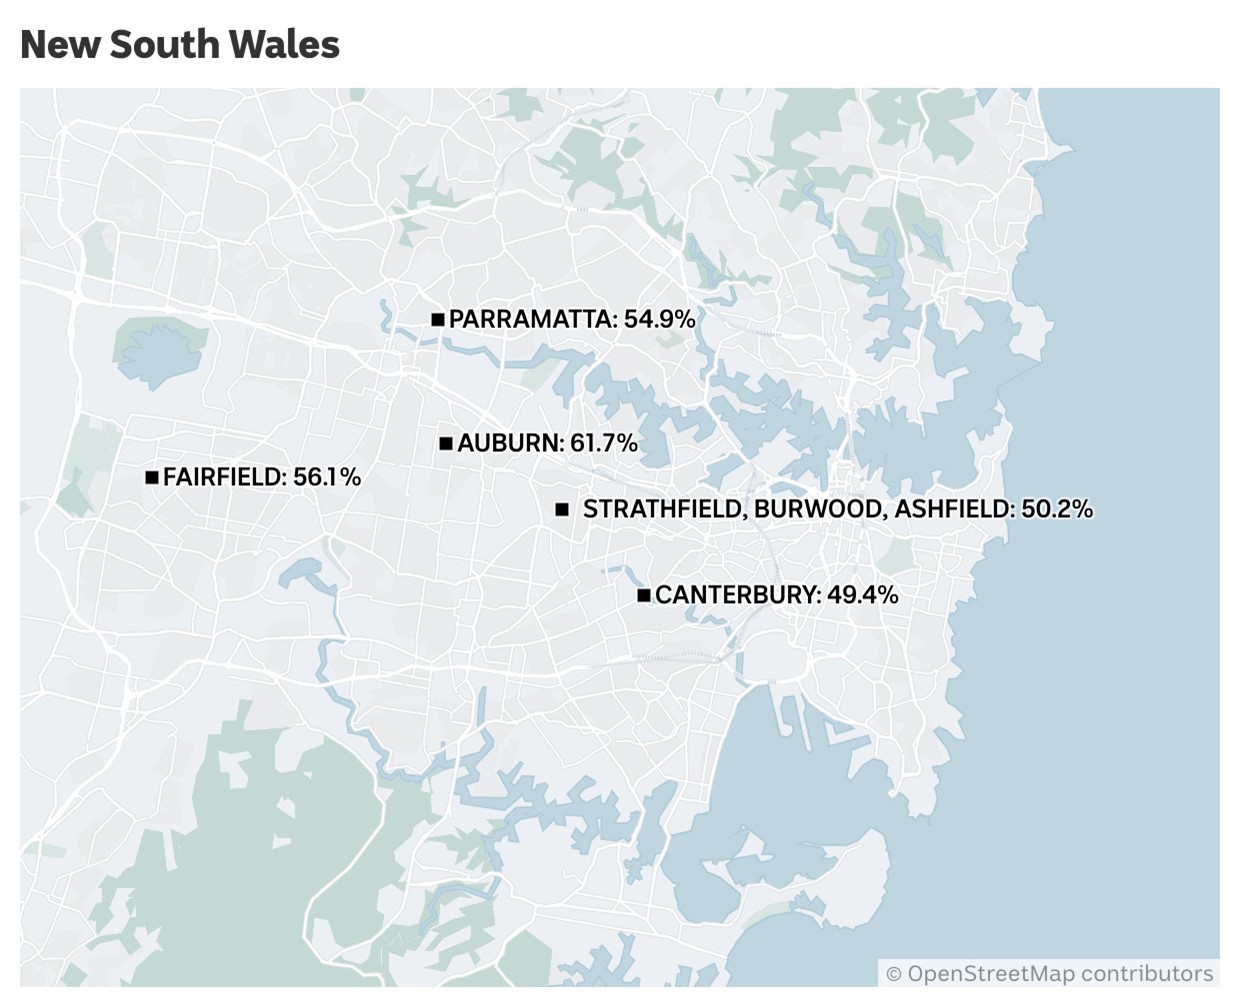 A map shows five of 10 culturally diverse locations in NSW.